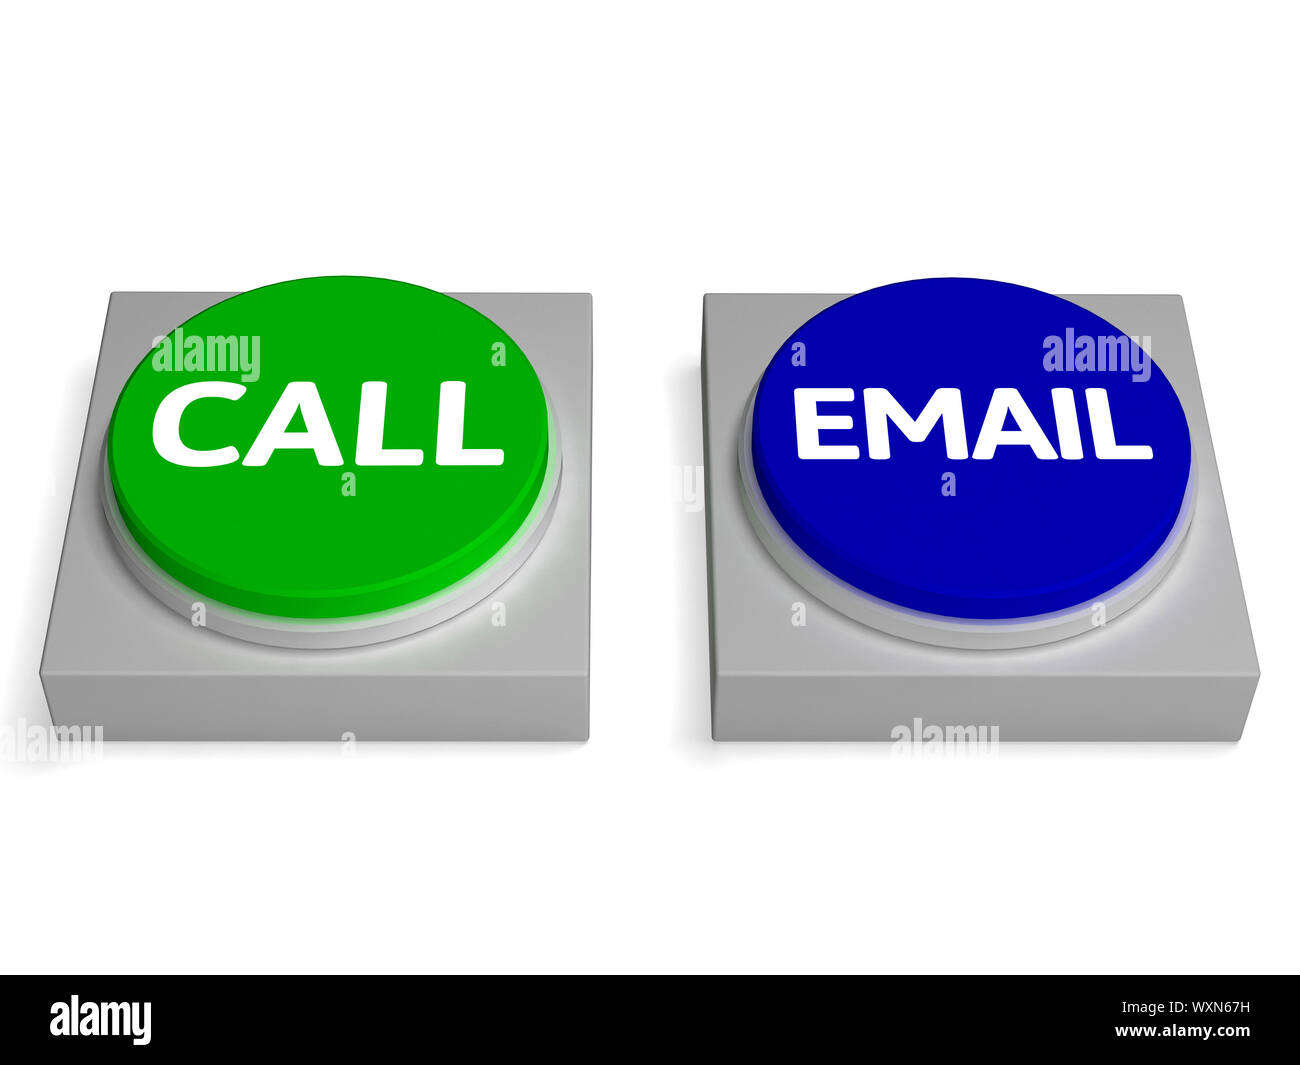 Call Email Buttons Showing Calling Or Emailing Stock Photo